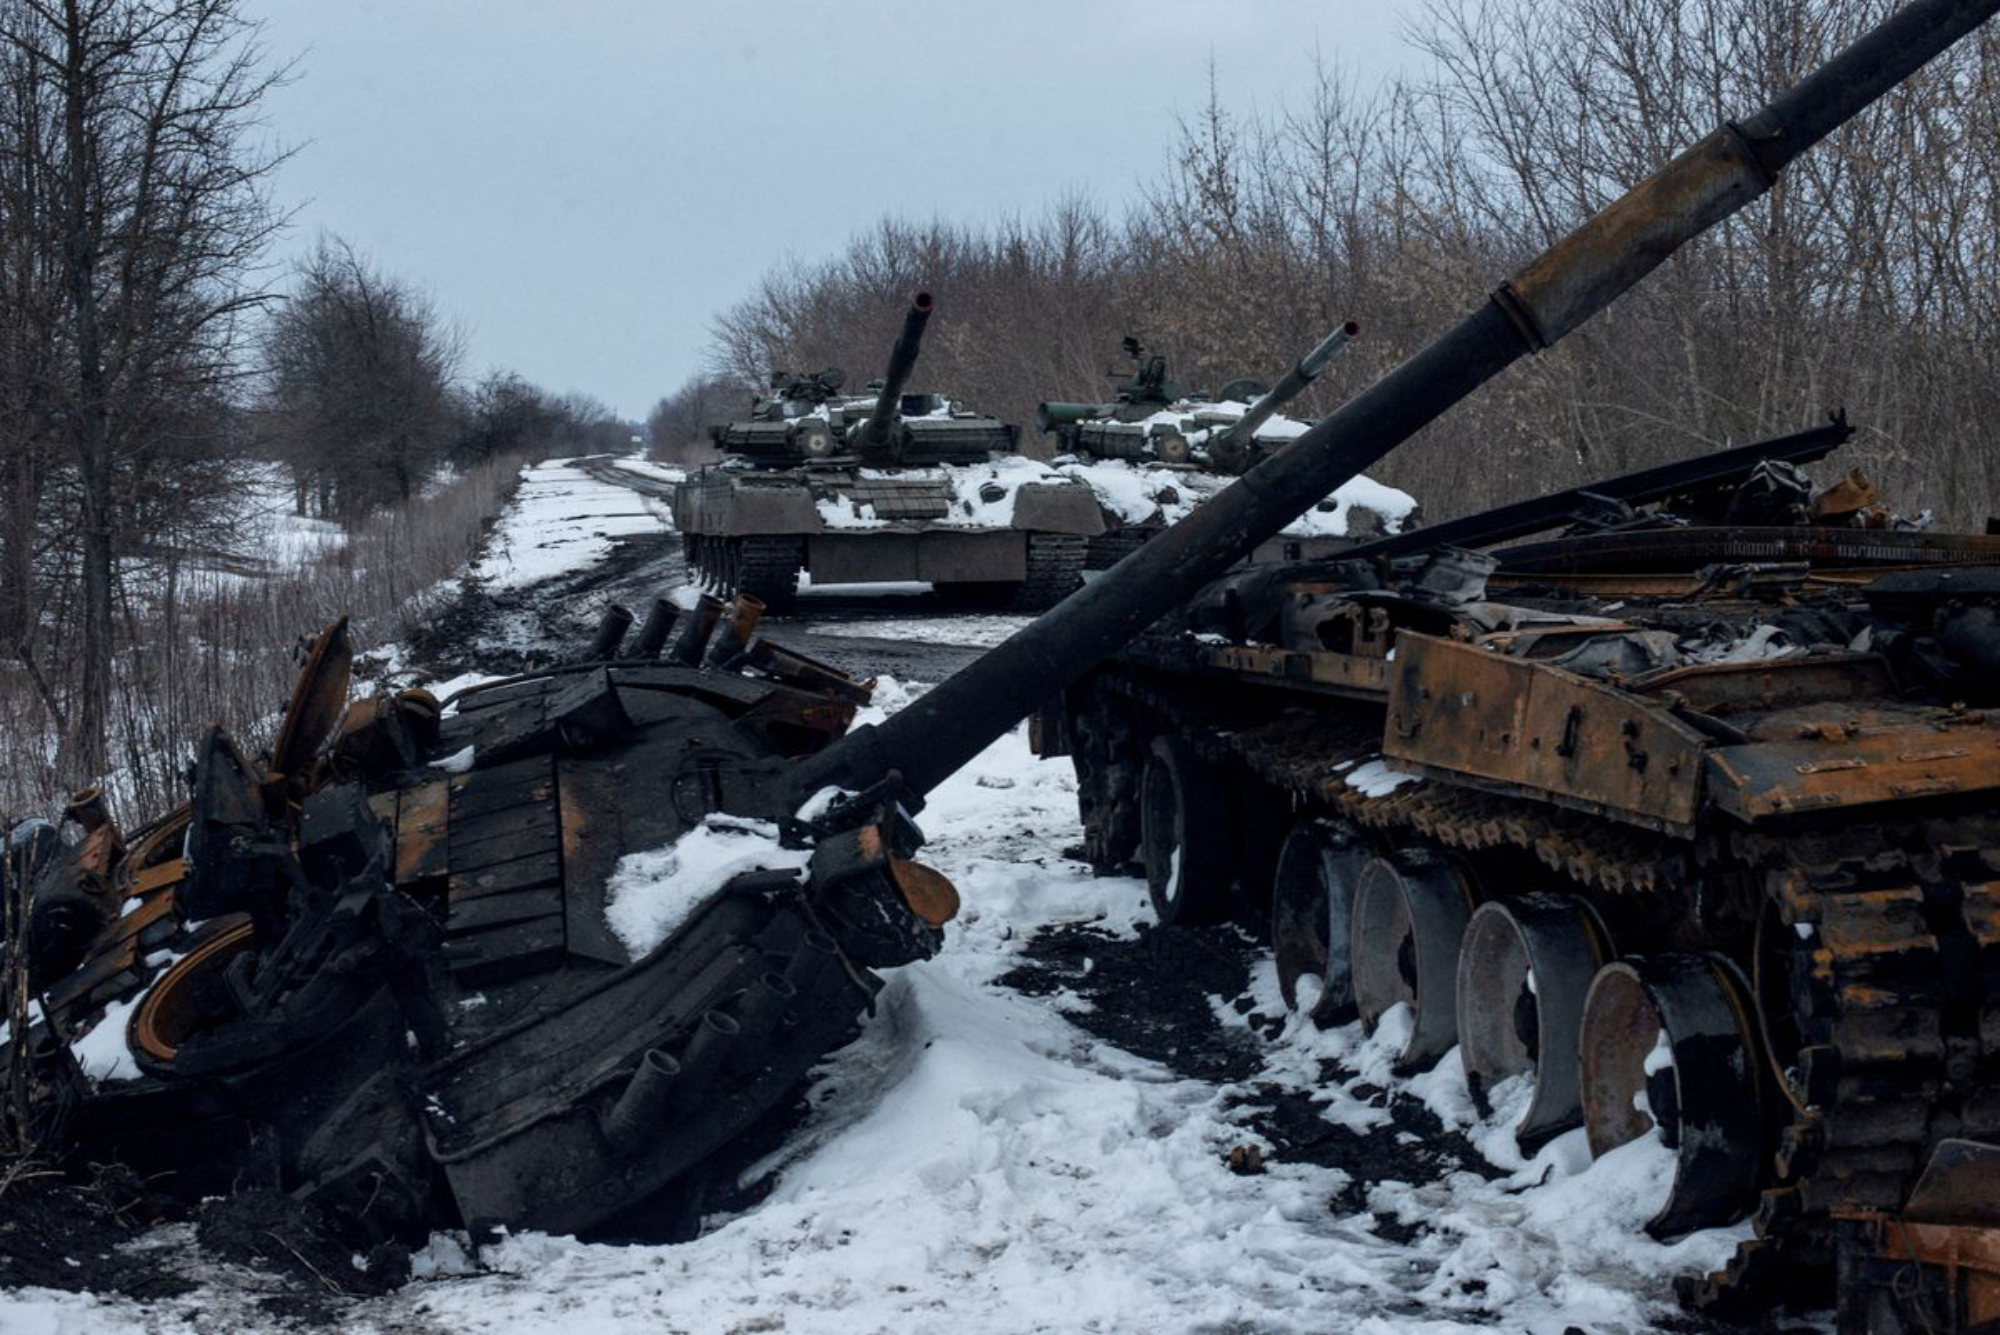 Charred and captured Russian tanks in the Sumy region, Ukraine, March 7. Photo by Irina Rybakova, Press service of the Ukrainian Ground Forces.